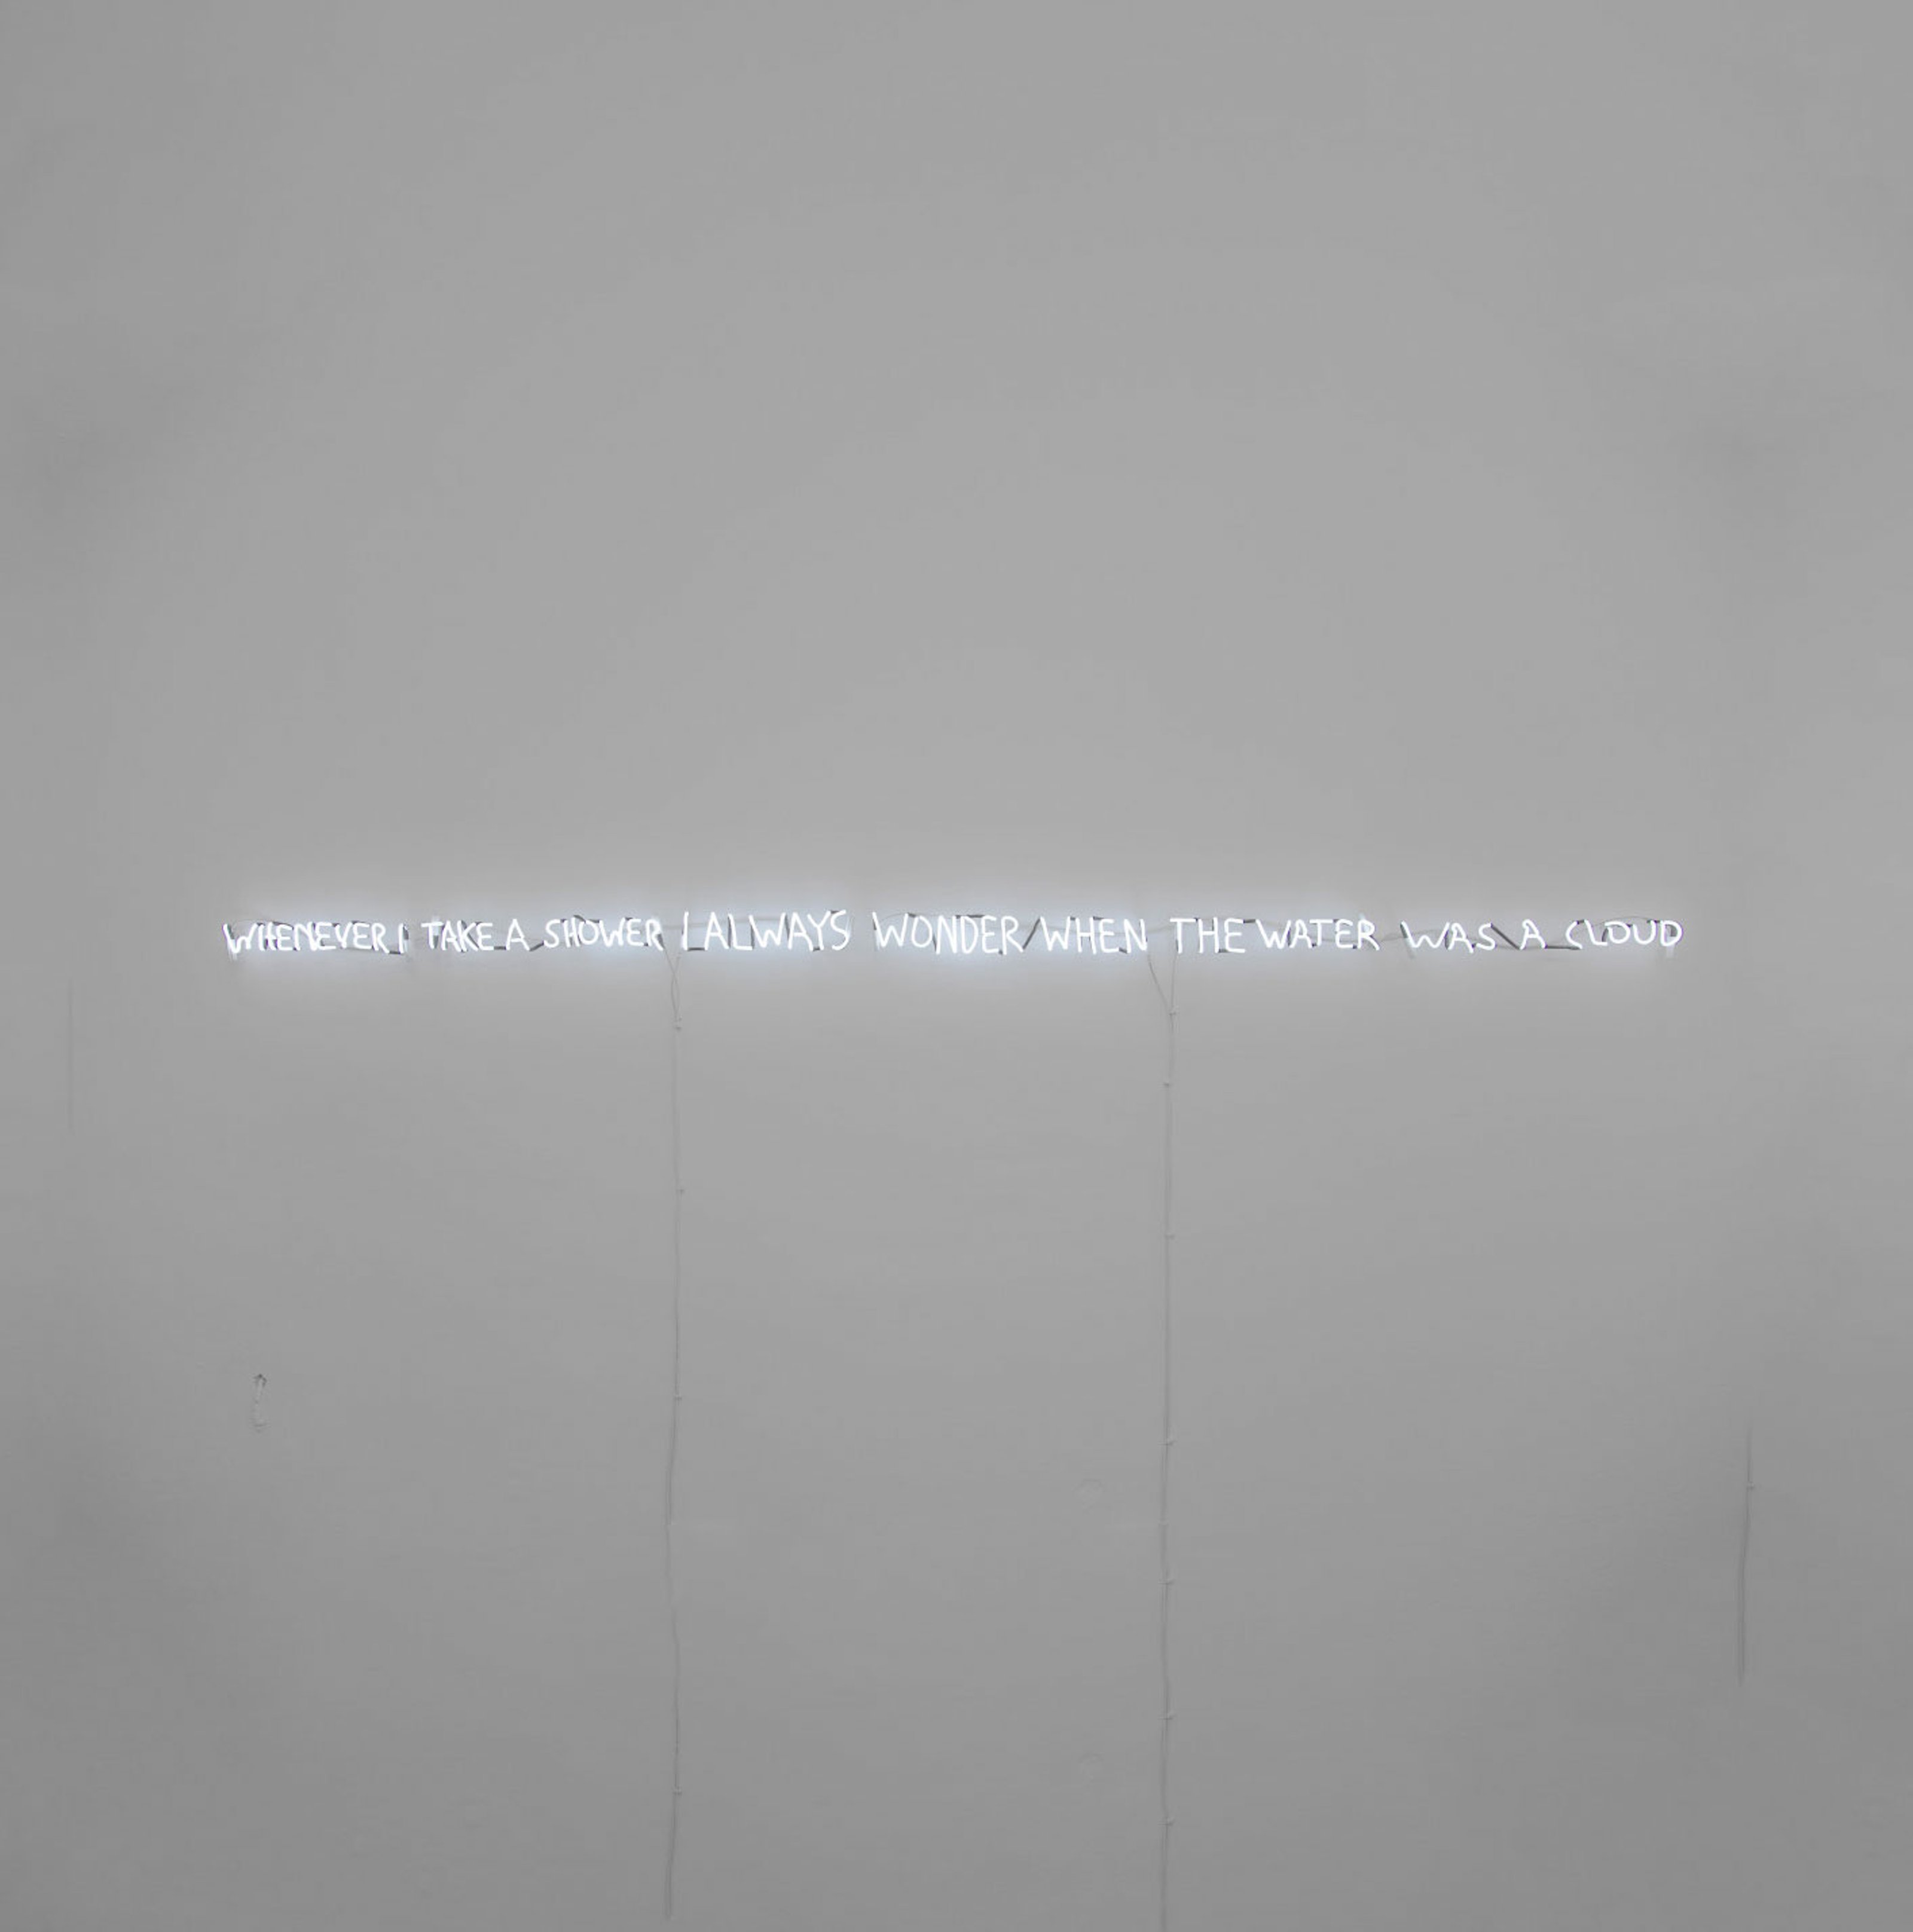 Written in neon: "Whenever I take a shower I always wonder when the water was a cloud" 